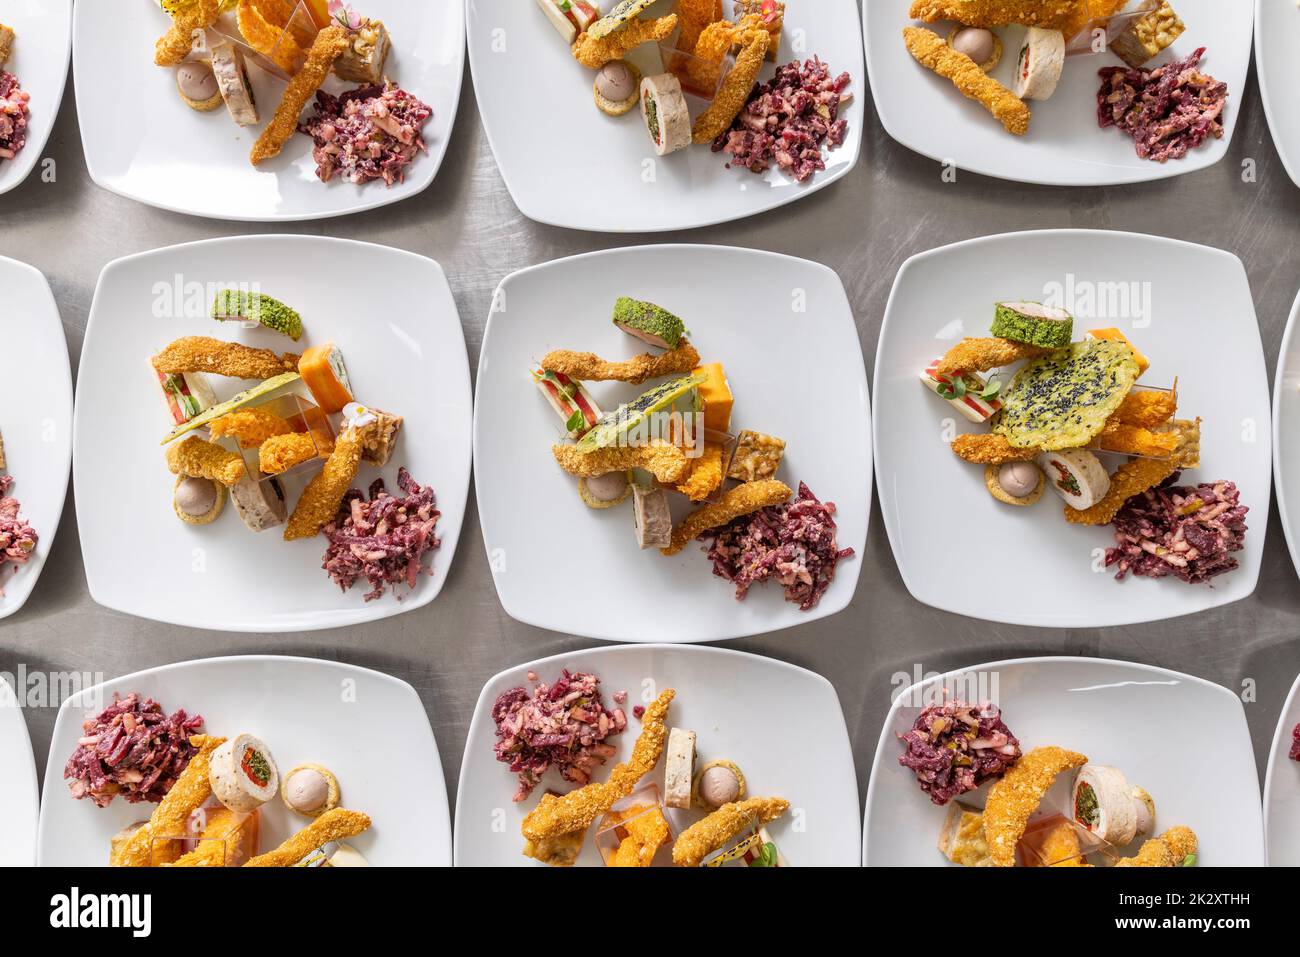 Top view of food appetizer Stock Photo